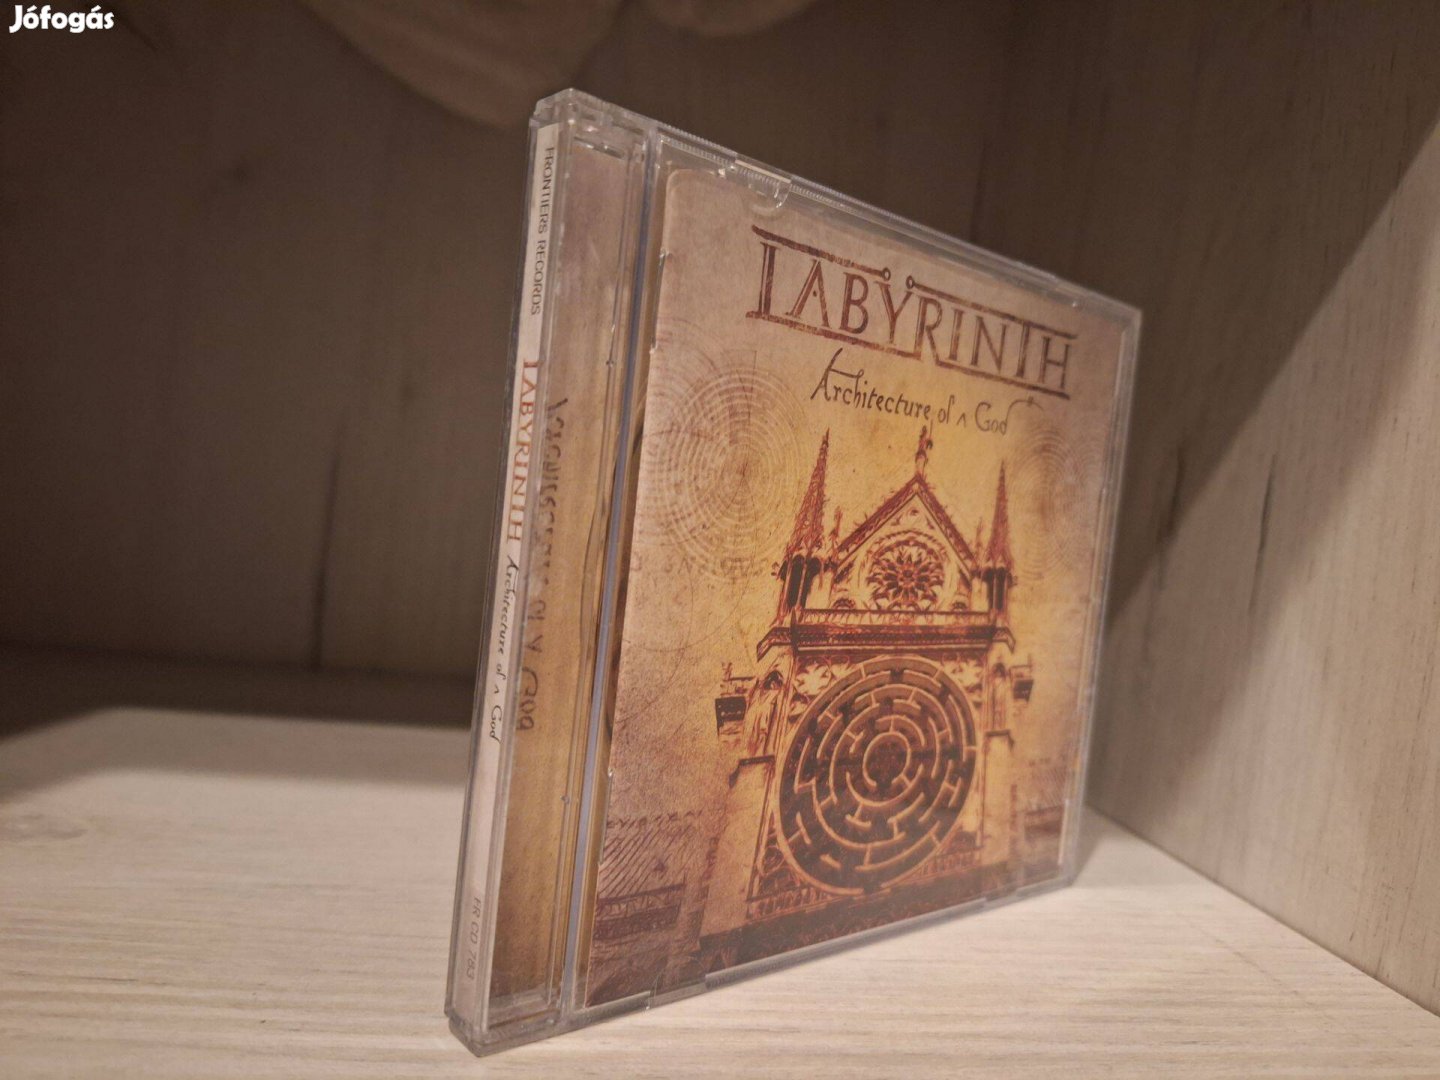 Labyrinth - Architecture Of A God CD